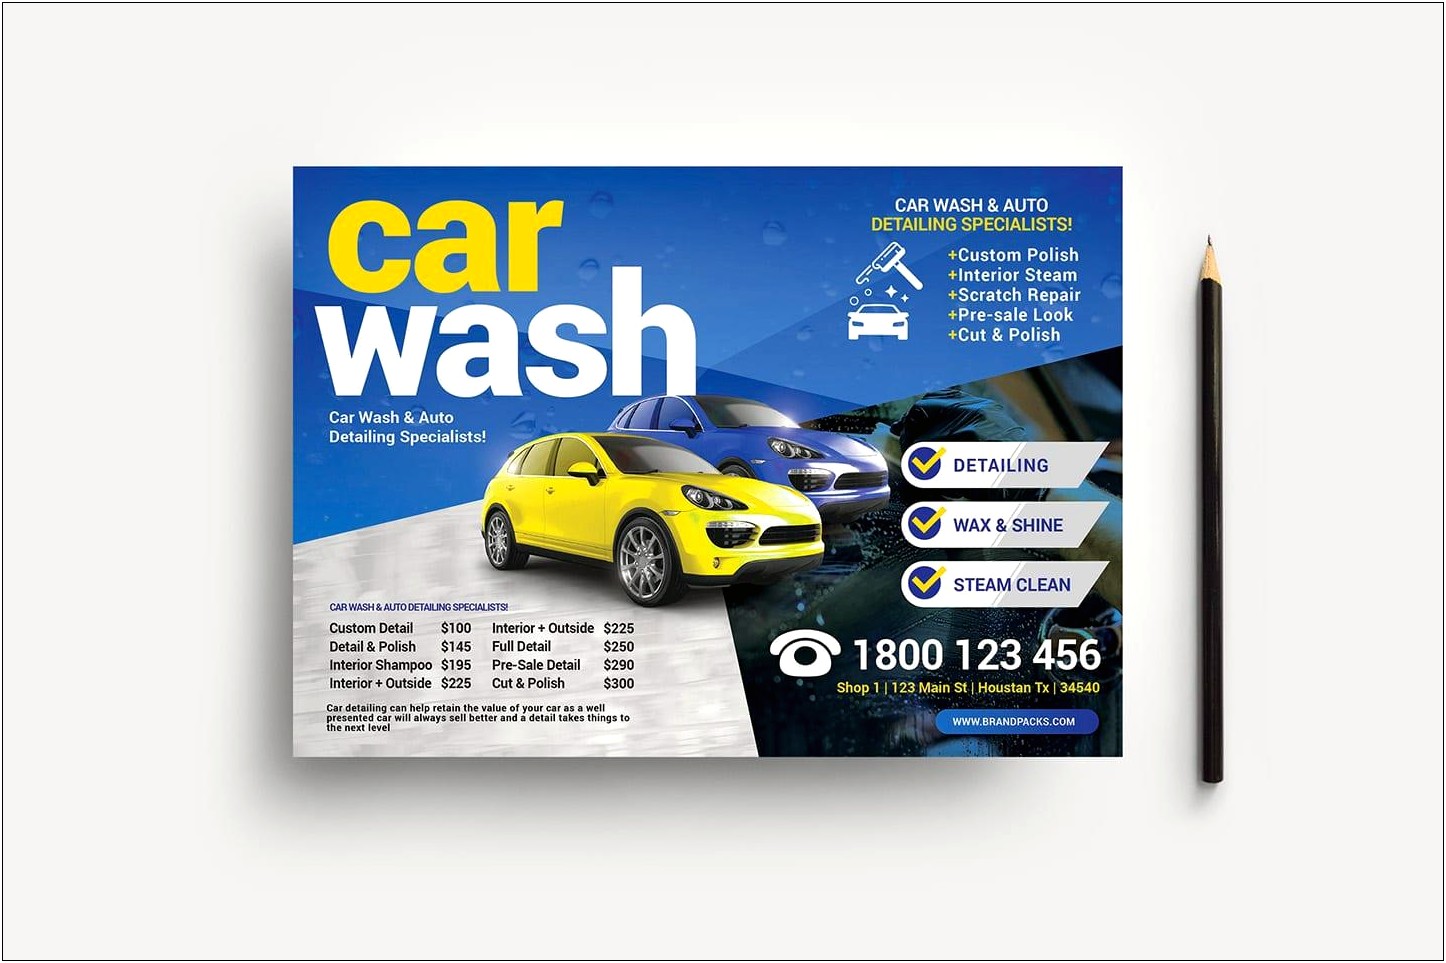 Car Wash Fundraiser Flyer Template Free